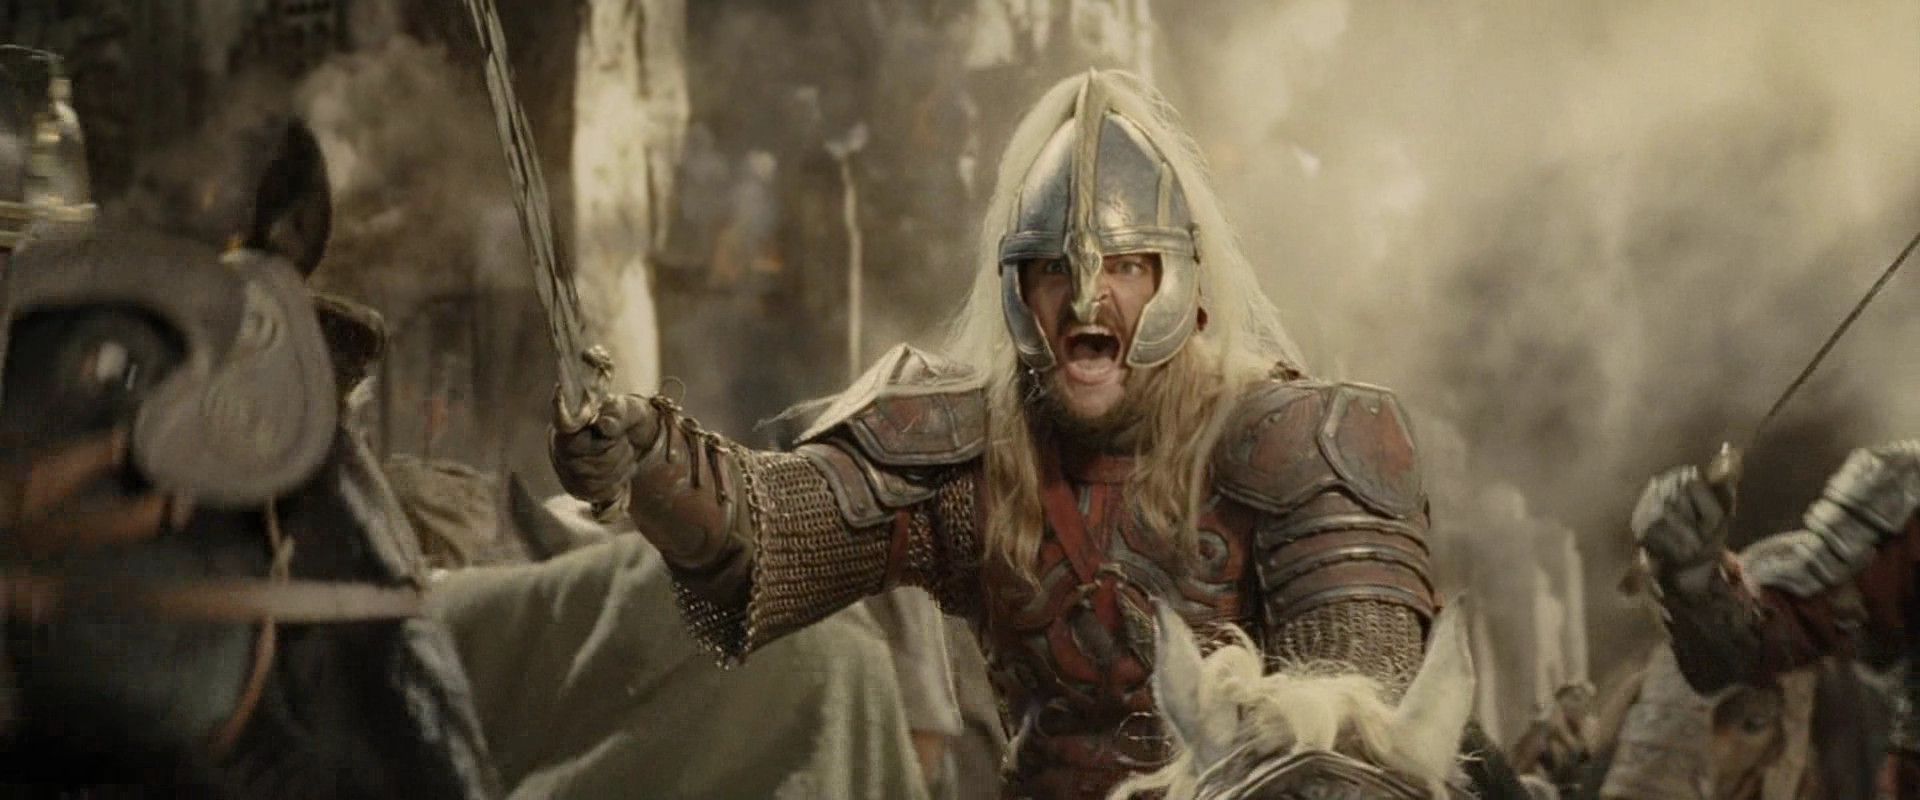 eomer-lord-of-the-rings-karl-urban